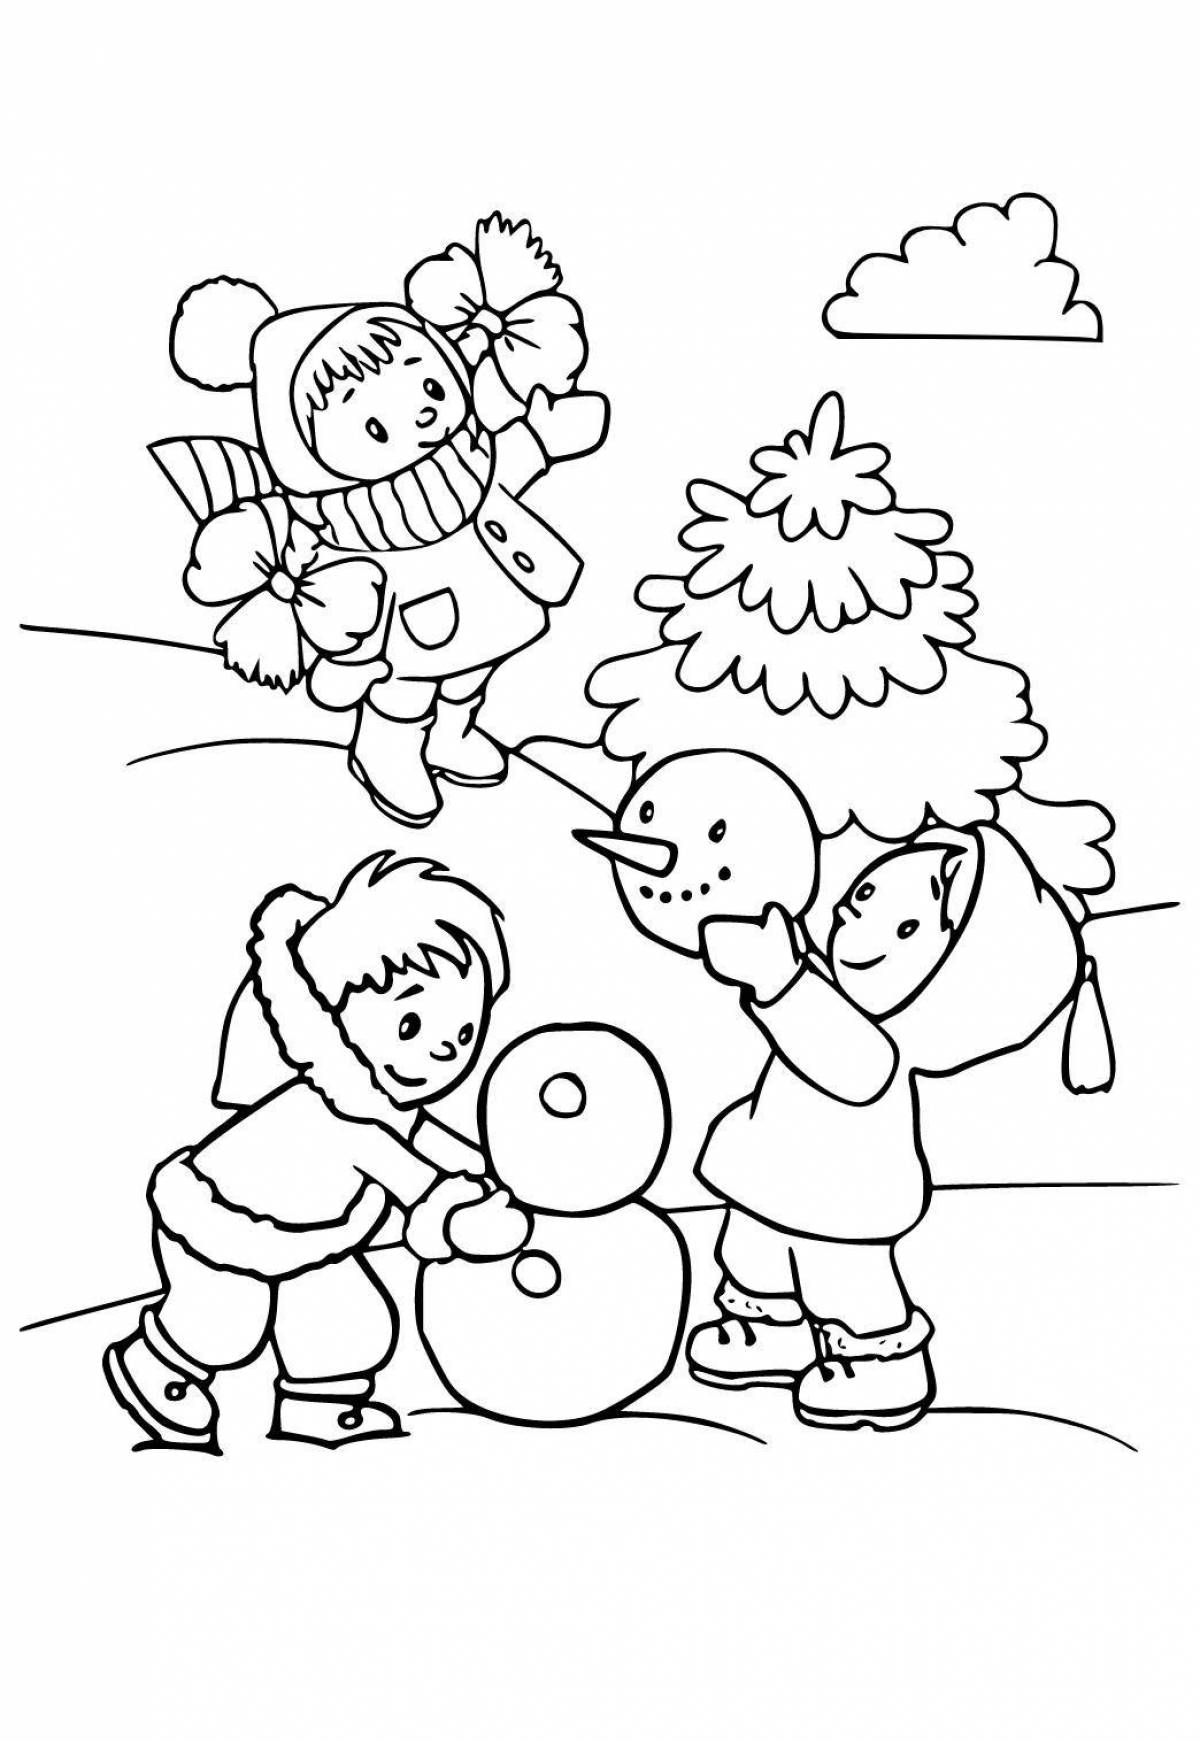 Misty winter coloring page